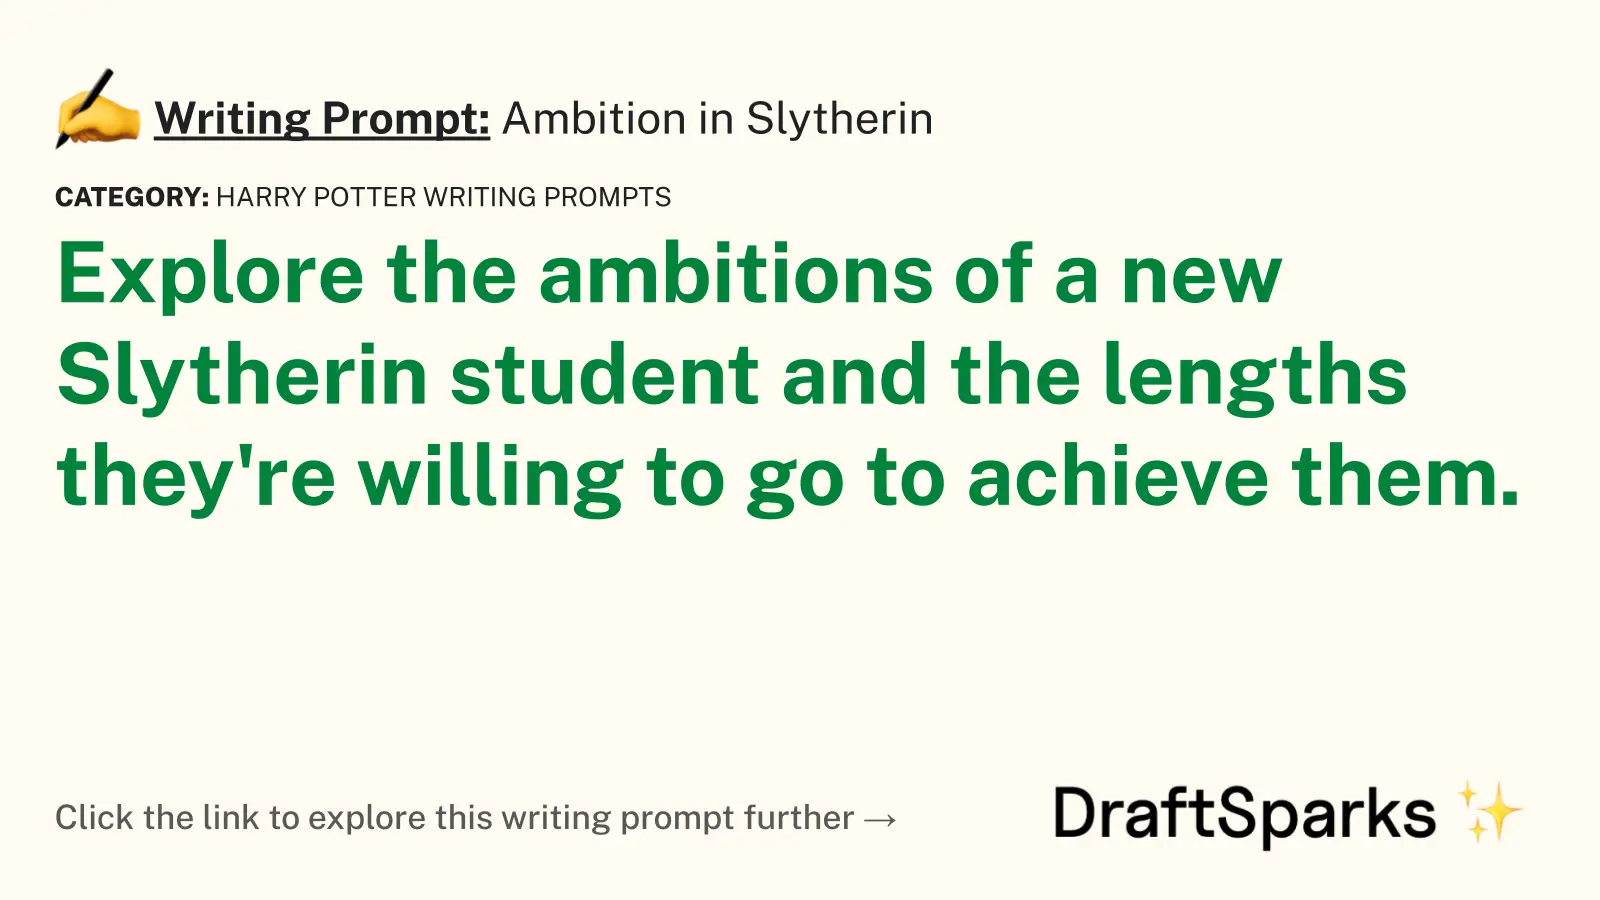 Ambition in Slytherin